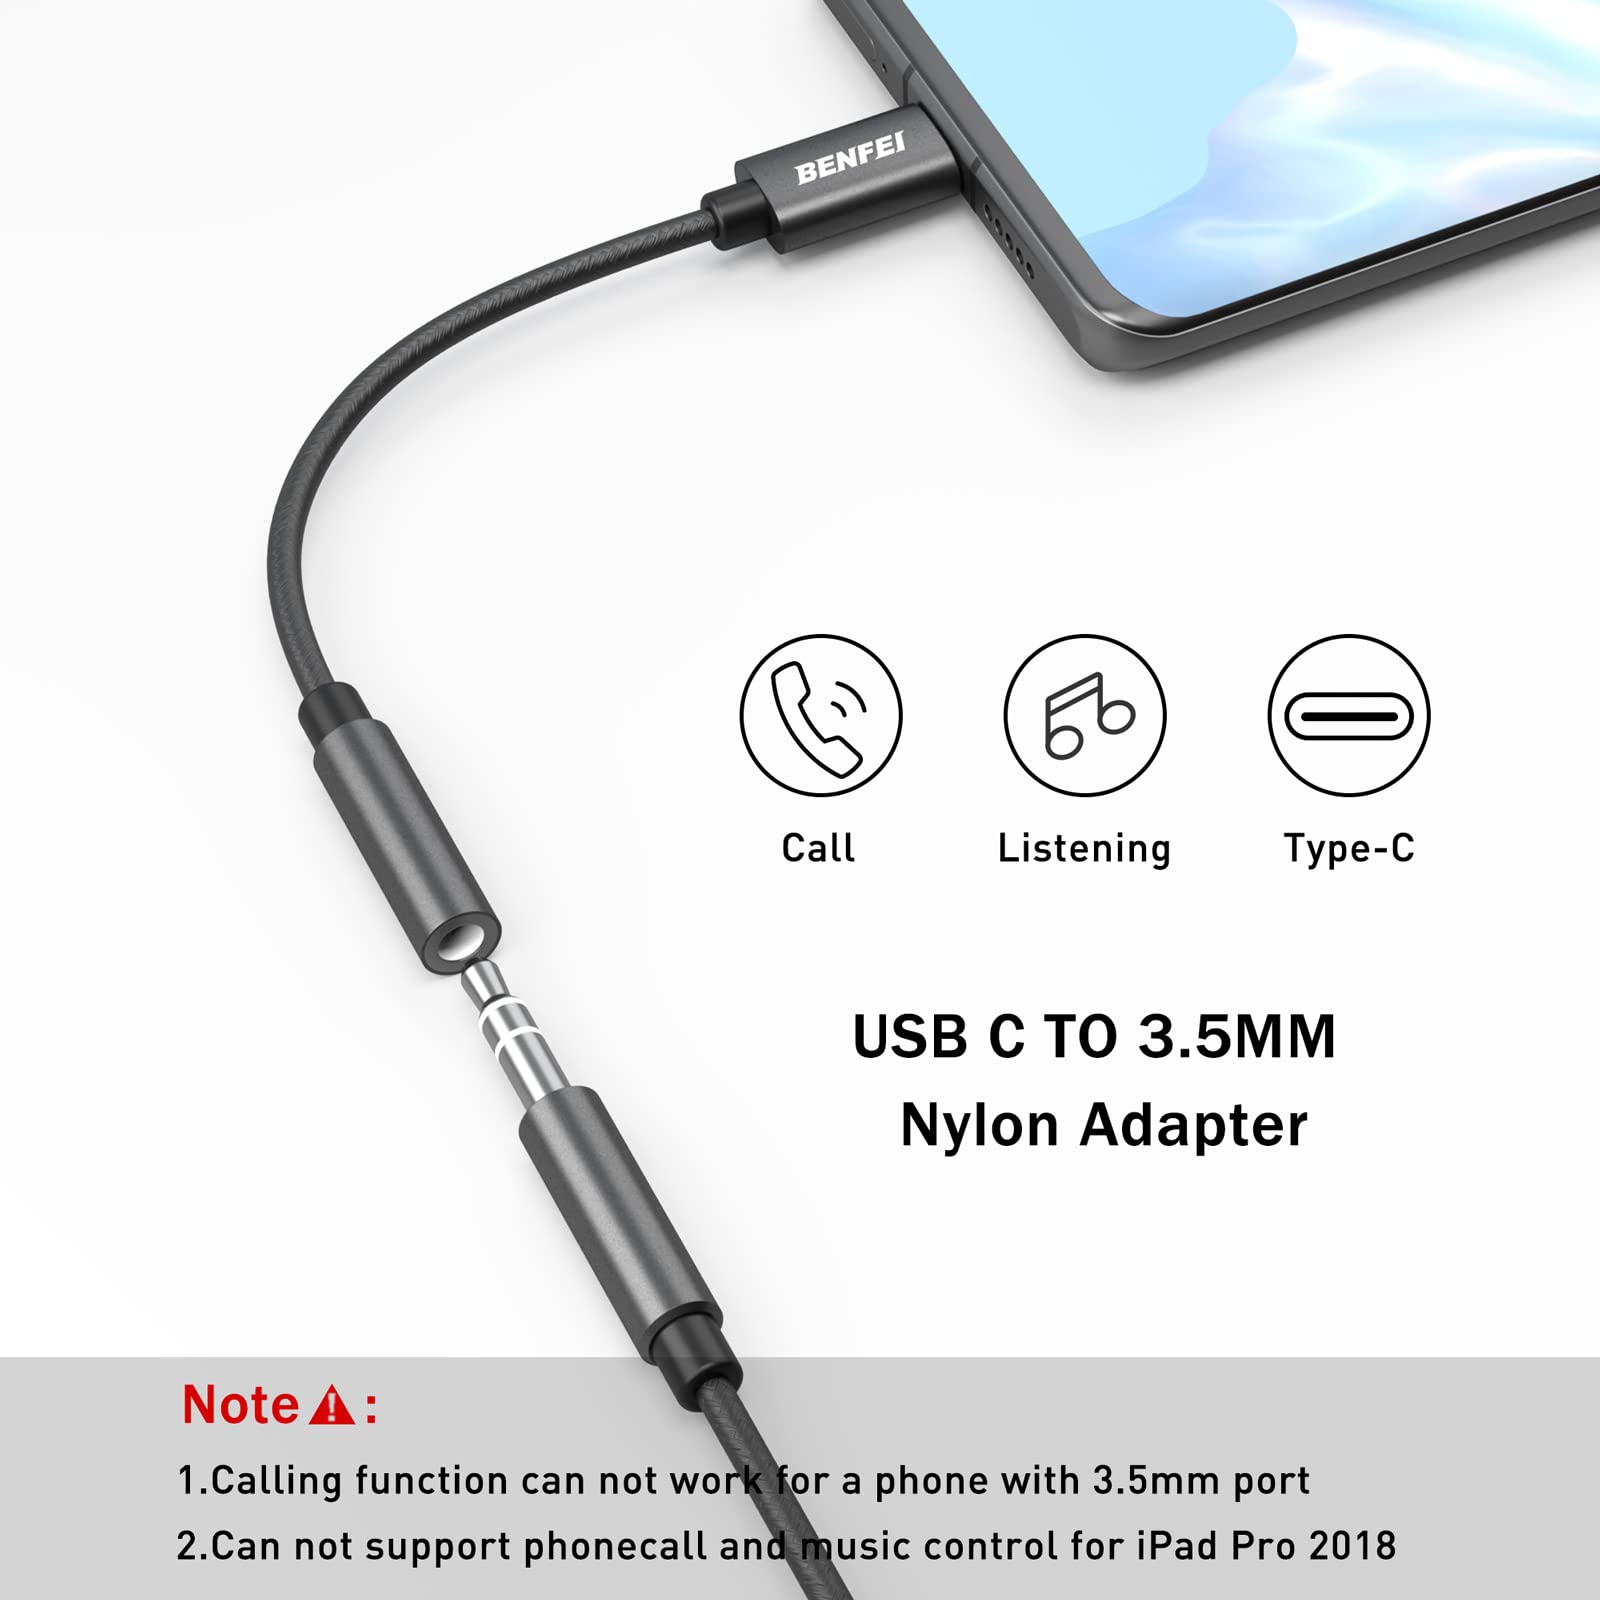 BENFEI USB-C to 3.5mm Headphone Jack Adapter, USB Type-C to 3.5mm Adapter Nylon Cable [DAC Hi-Res] Compatible with iPad Pro New 2018 2019, Pixle 2/XL/3,HTC, Samsung S10/S8/S9/Note 8 - Black